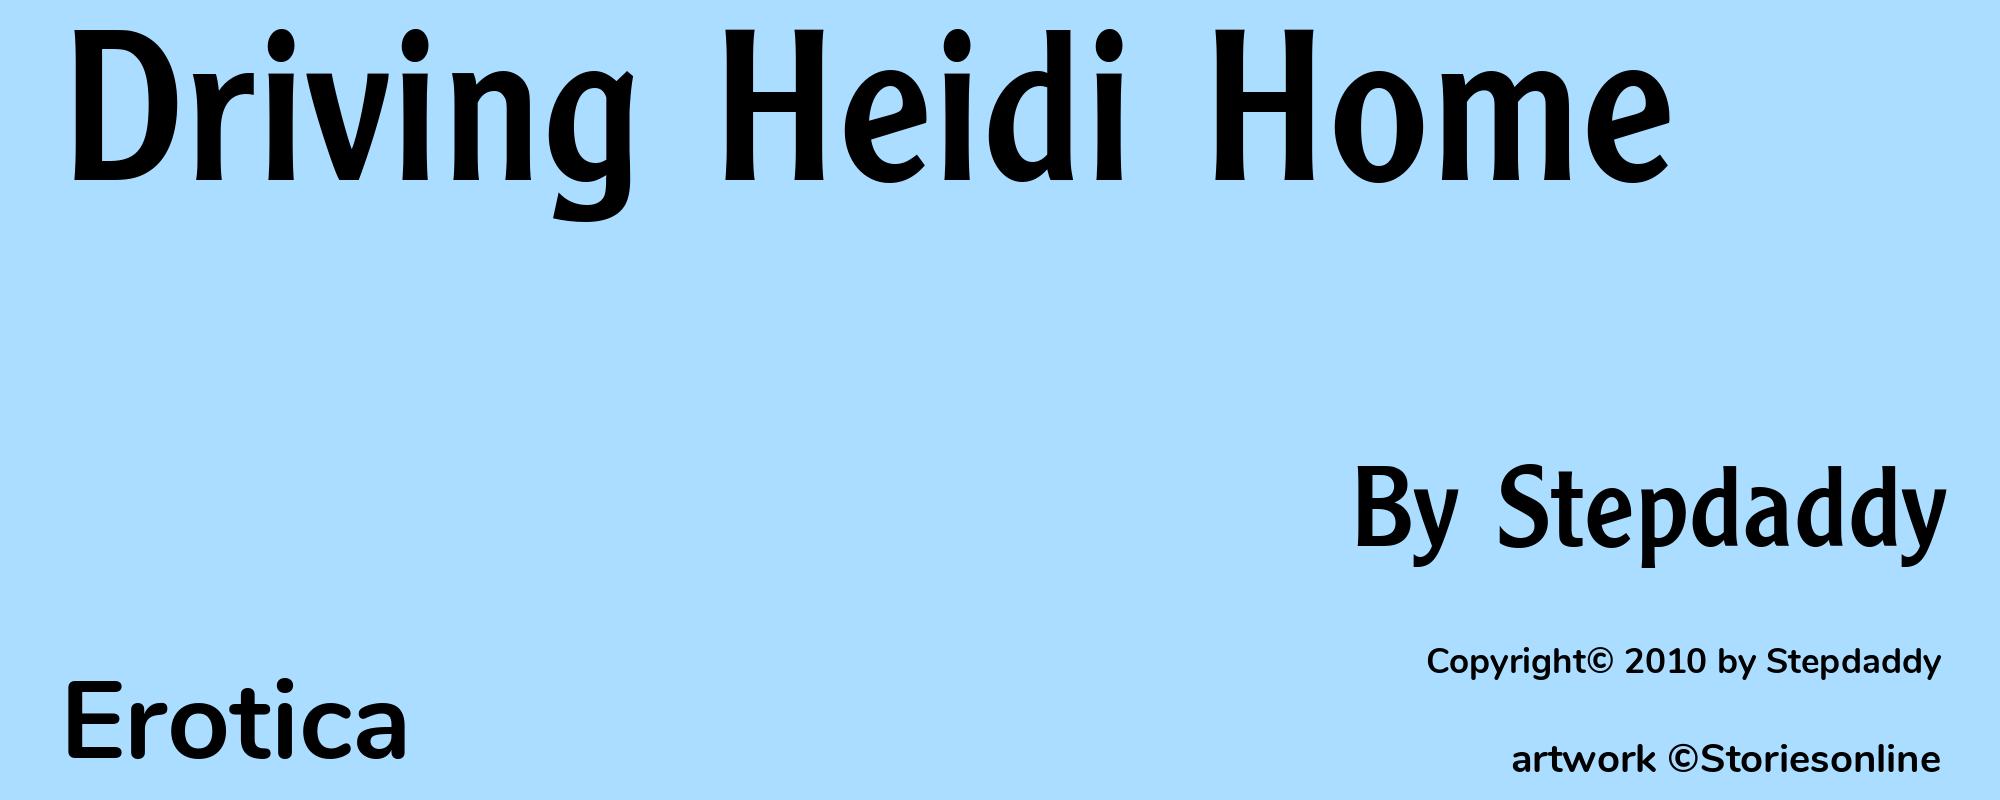 Driving Heidi Home - Cover